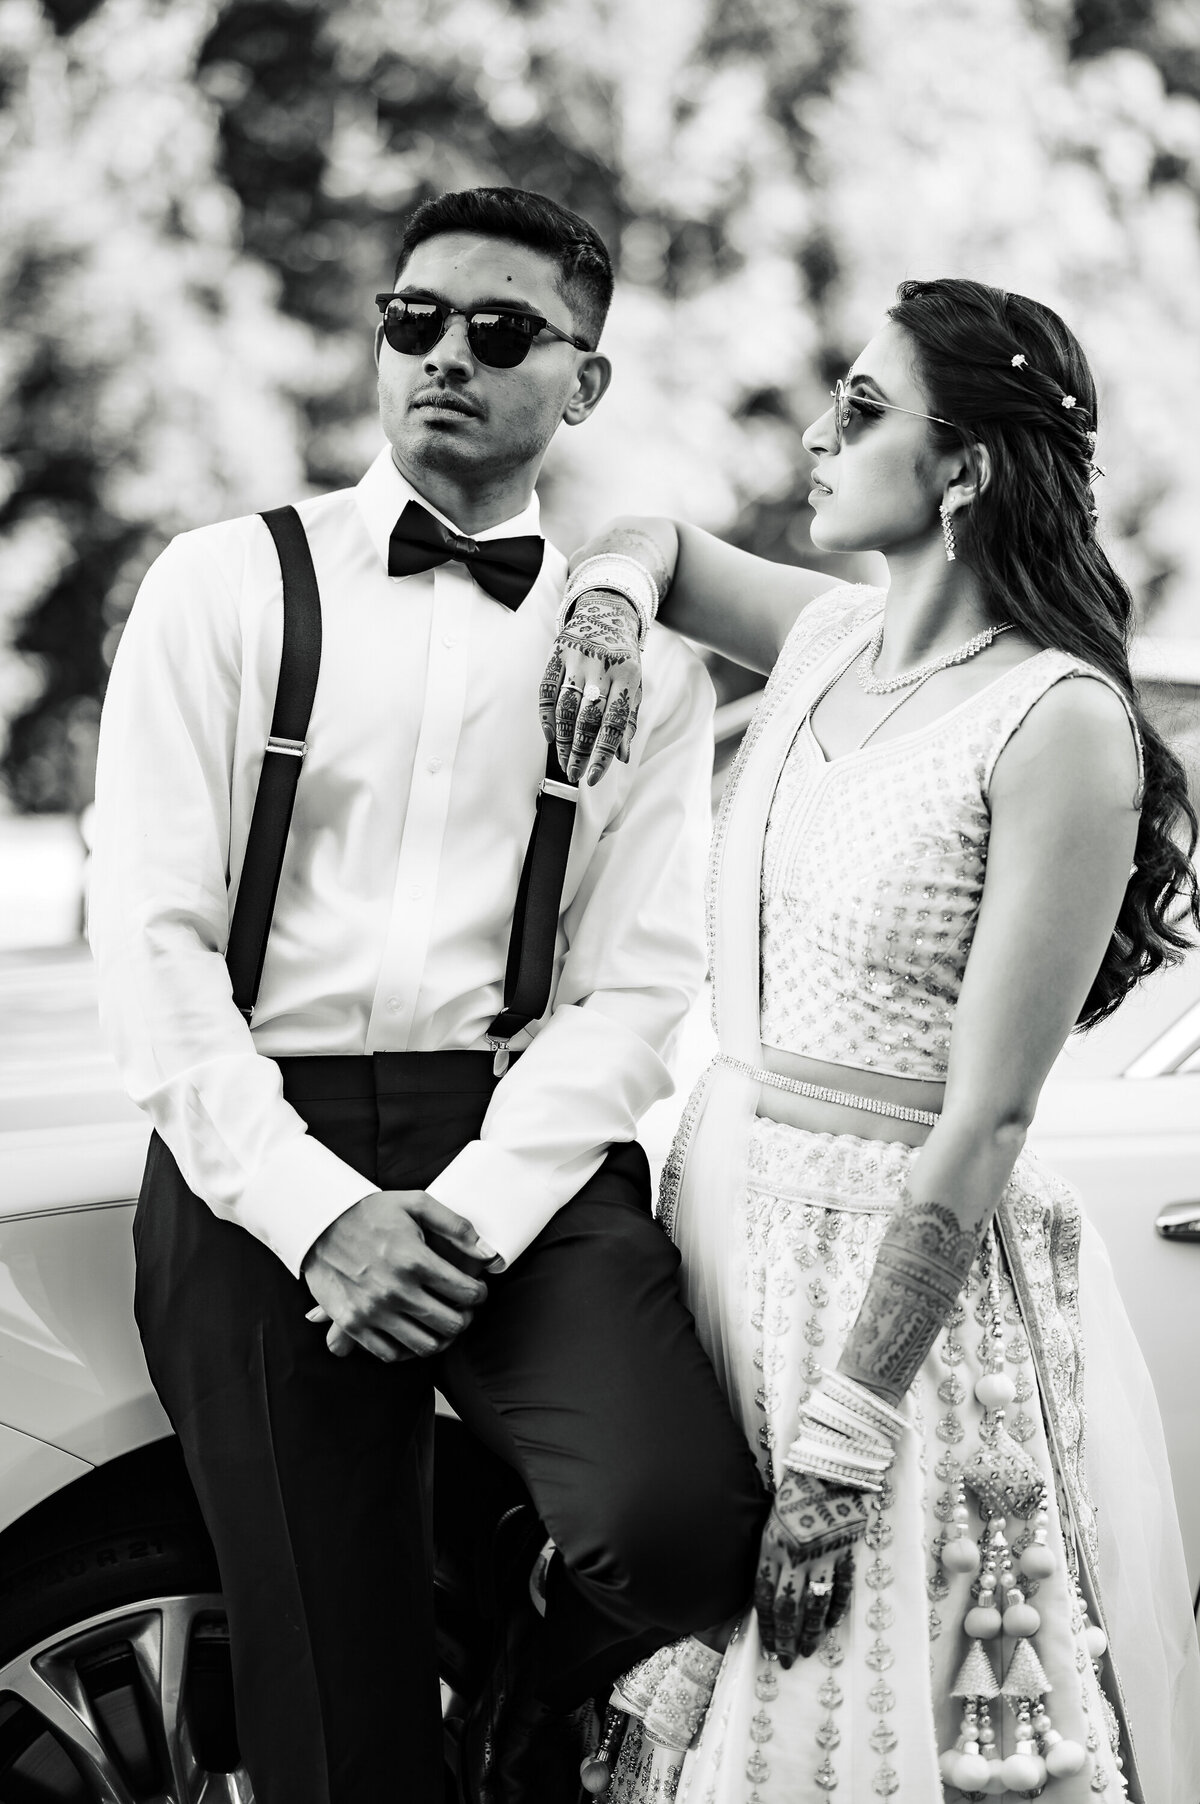 Ishan Fotografi is an NJ & NYC photographer for modern Indian couples. Editorial photos with effortless posing.